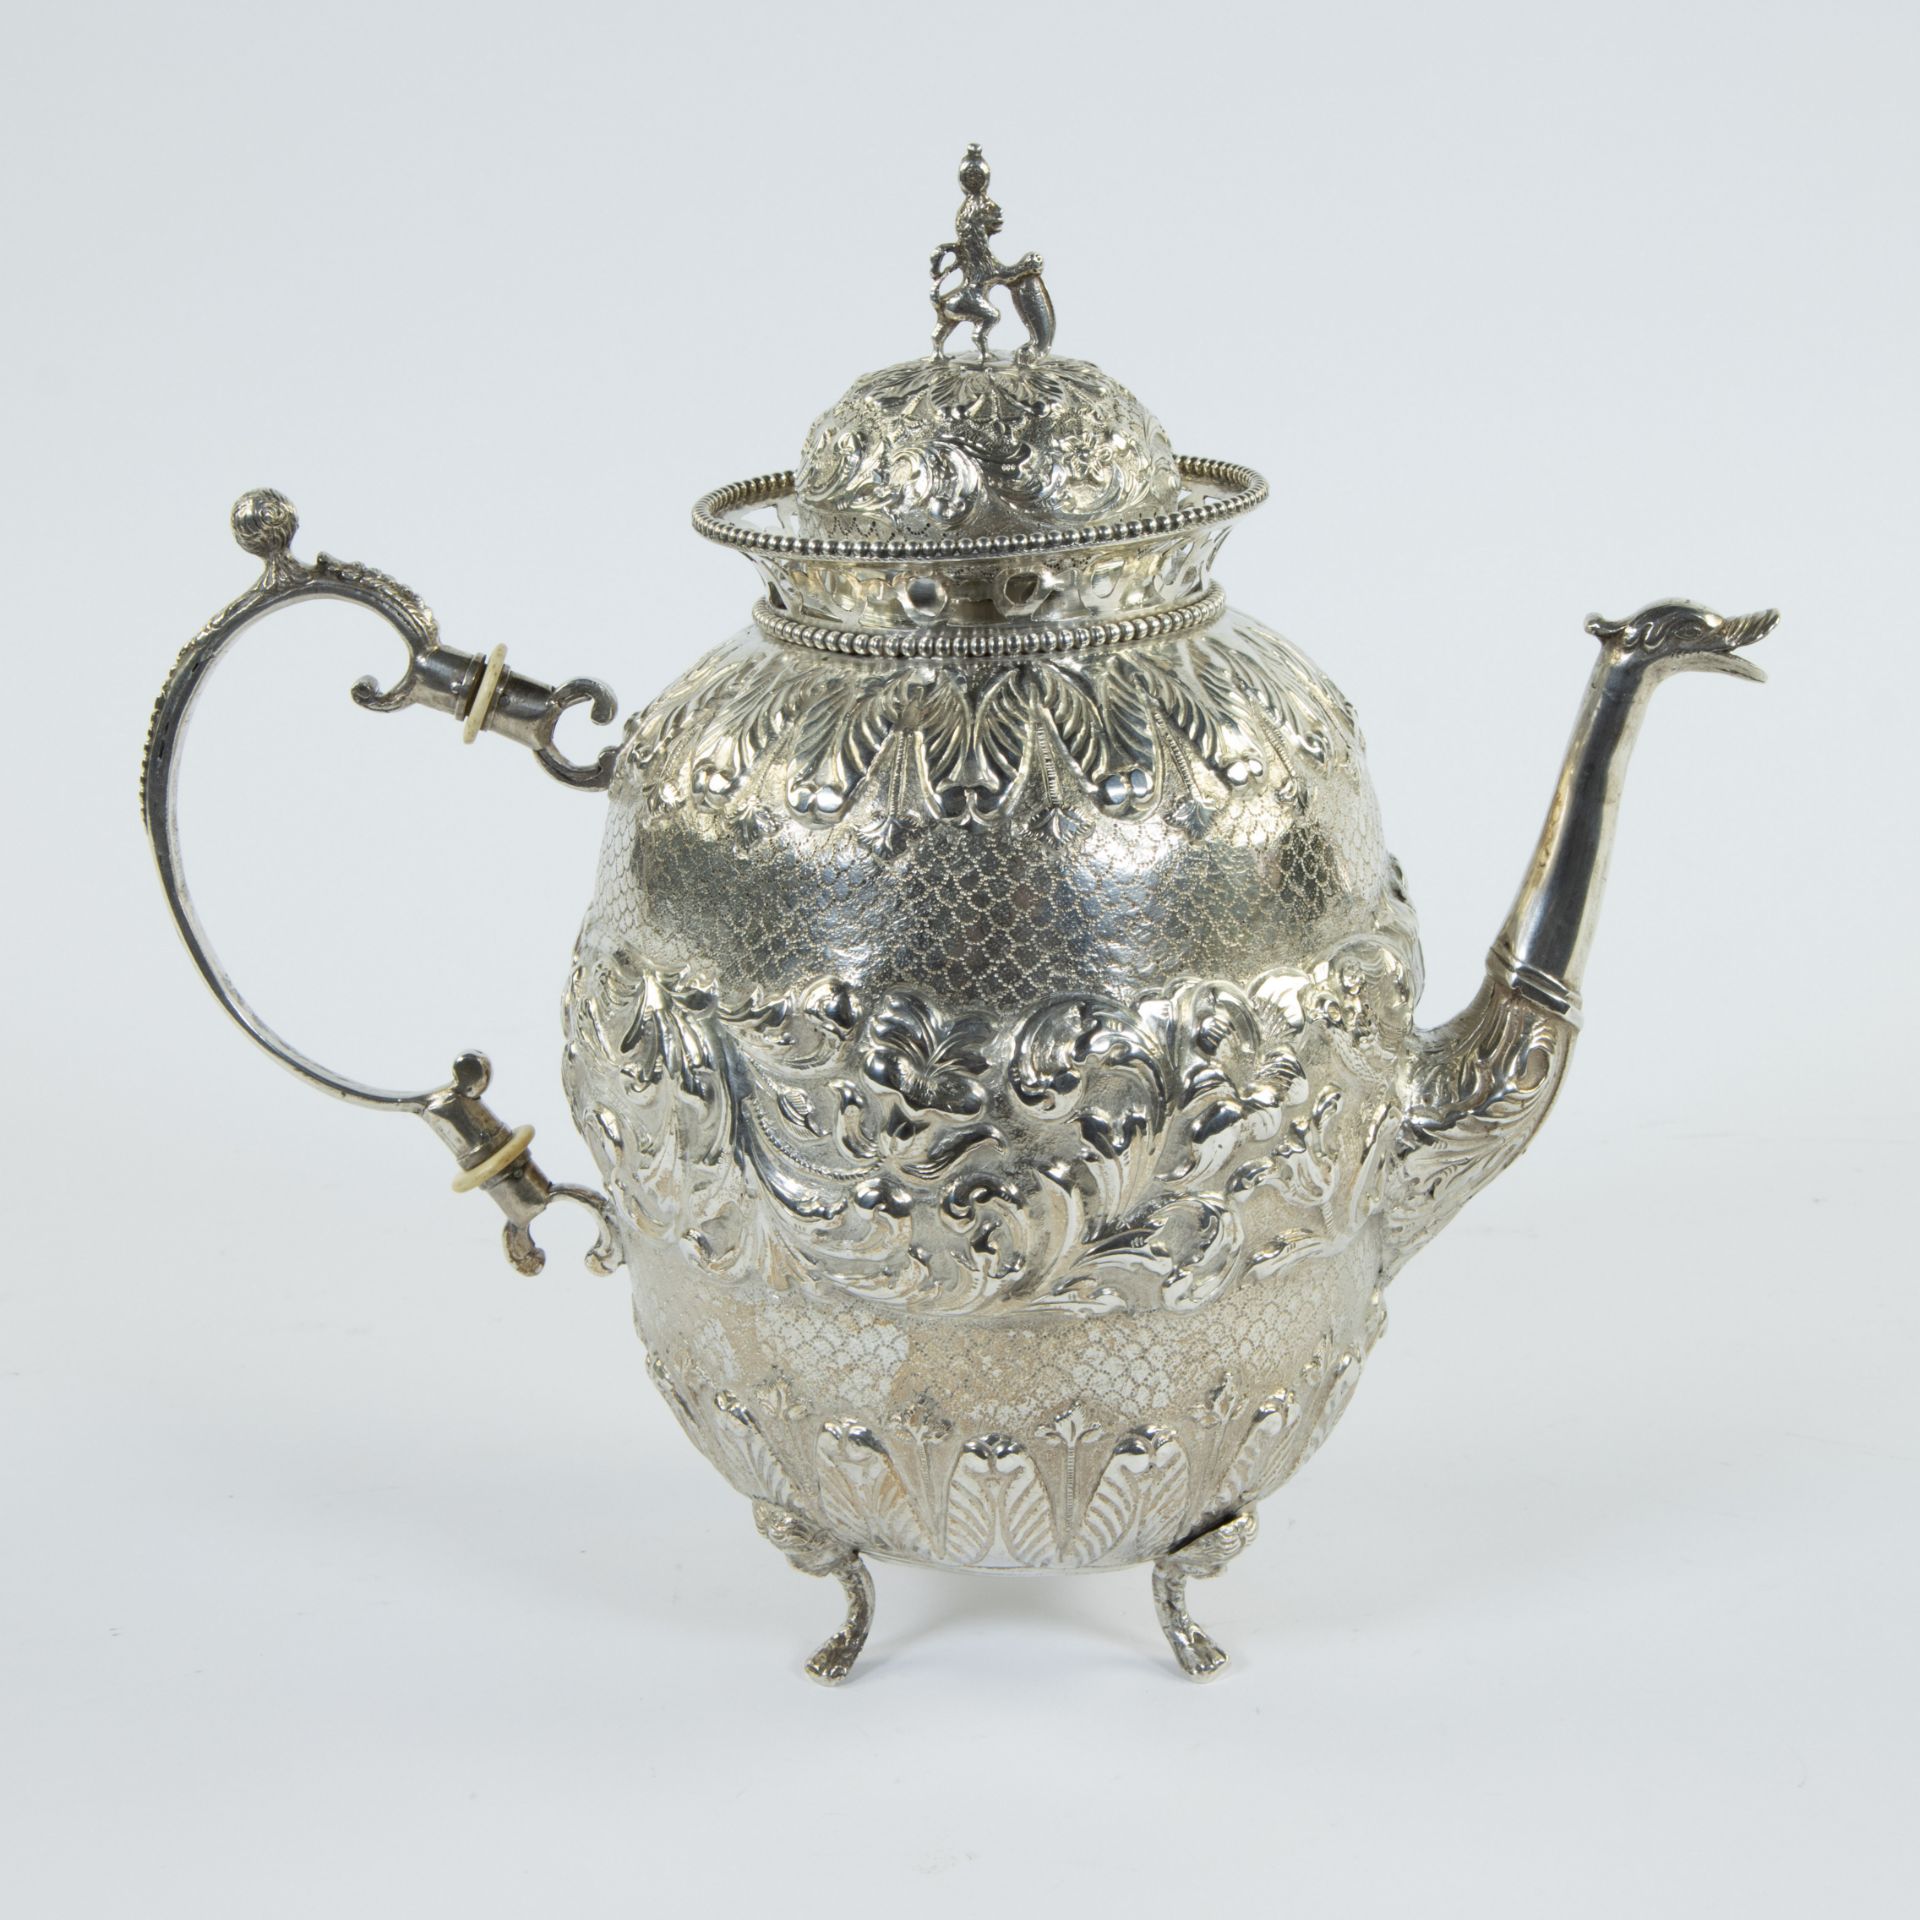 Solid silver coffee pot Ate de Groot Boersma Friesland, 772 grams, marked - Image 3 of 6